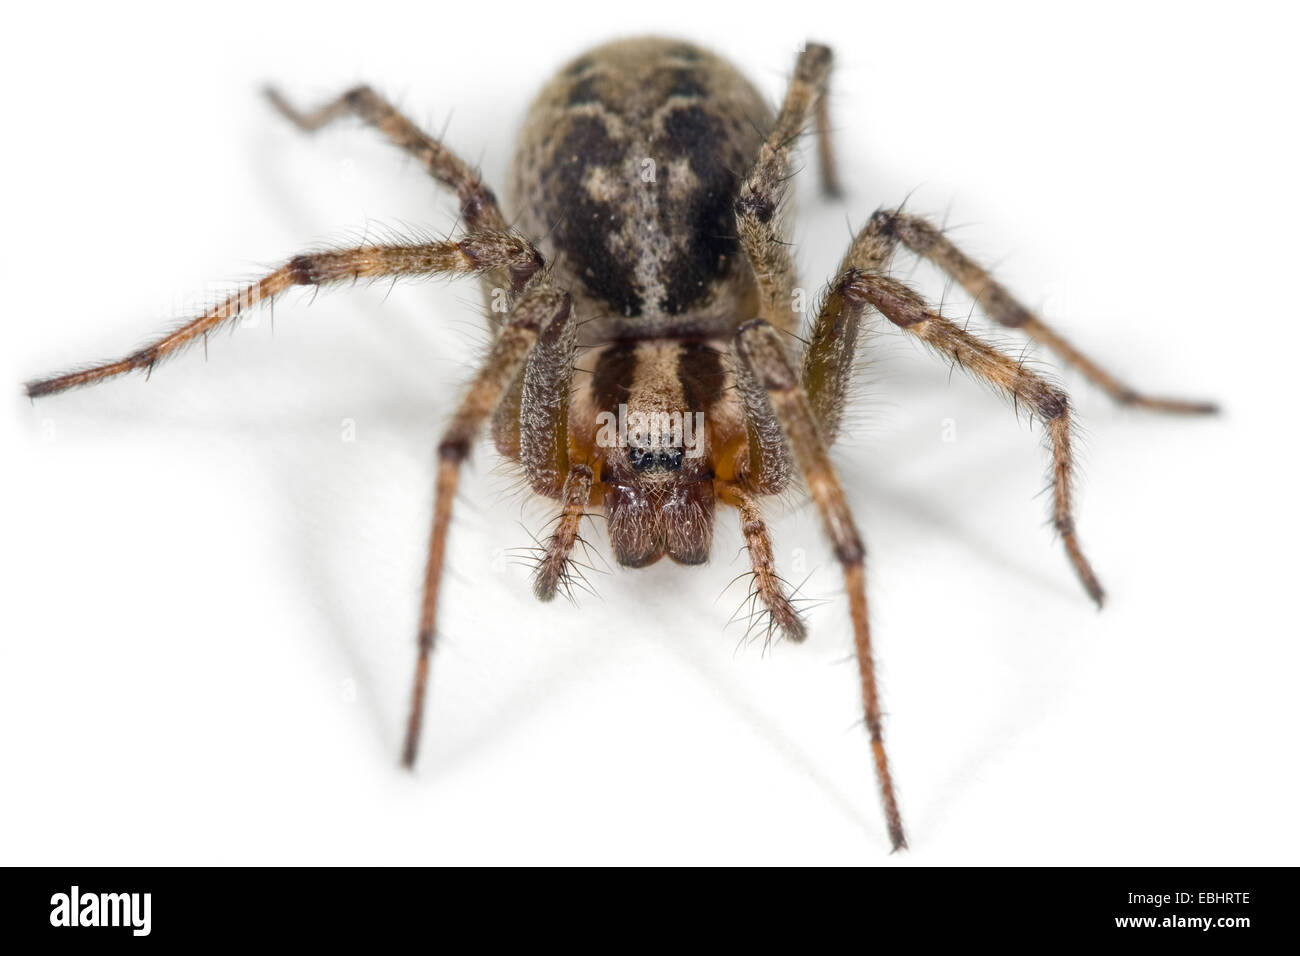 A female Labyrinth spider, Agelena labyrinthica, head-on view on a white background. Part of the family Agelenidae. Stock Photo